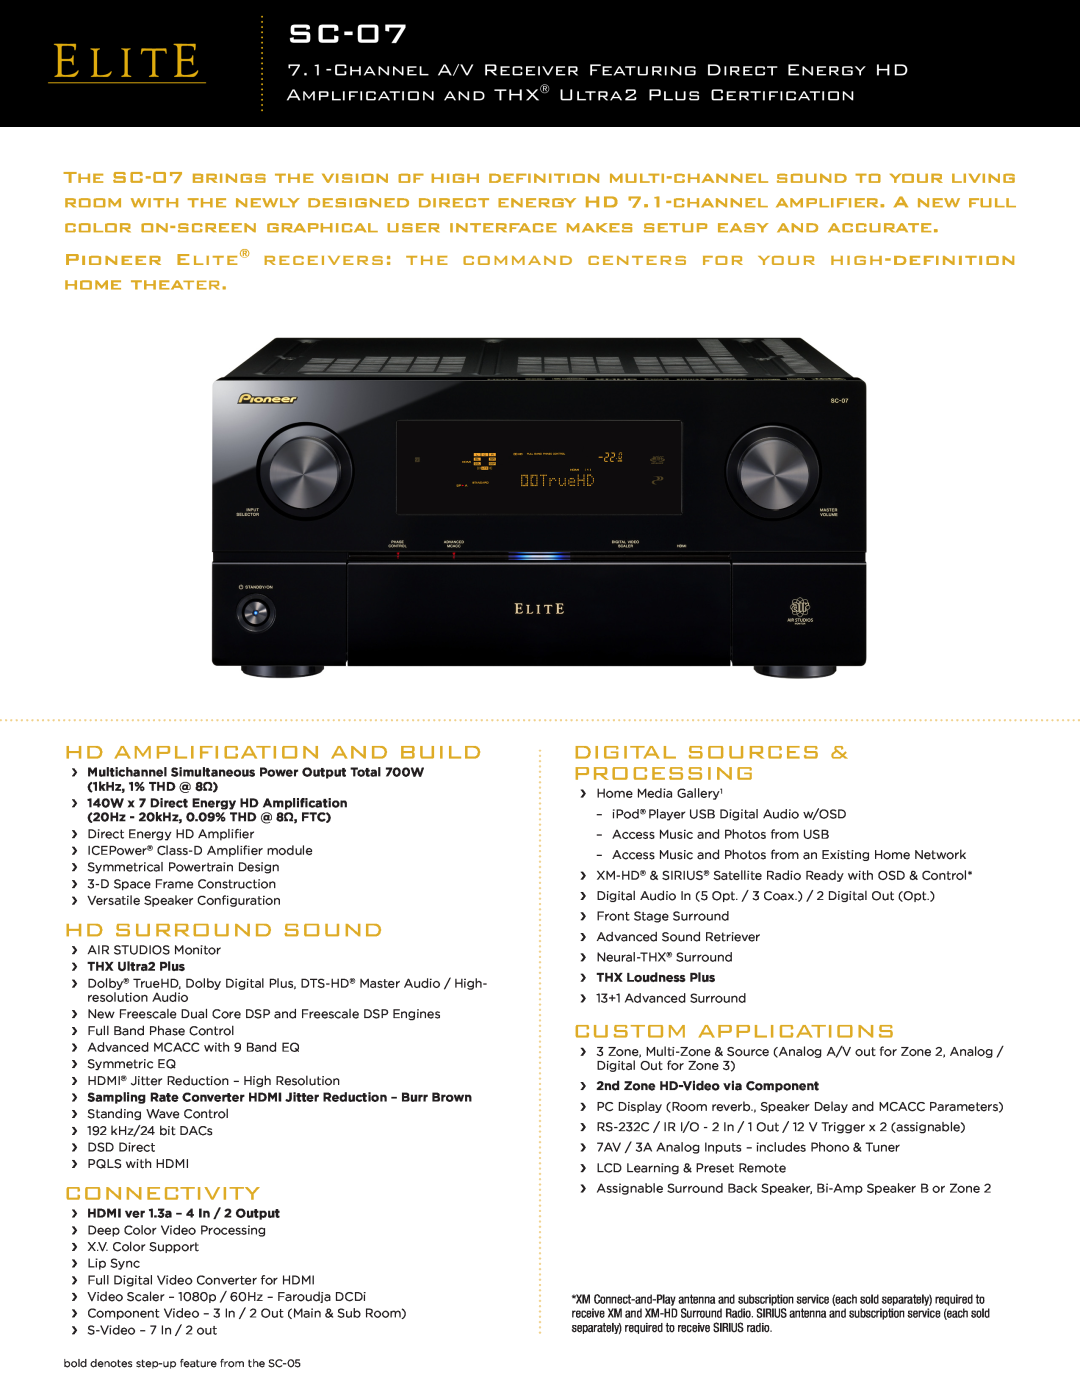 Elite SC-07 manual Hd Amplification And Build, Hd Surround Sound, Digital Sources, Connectivity, Processing 